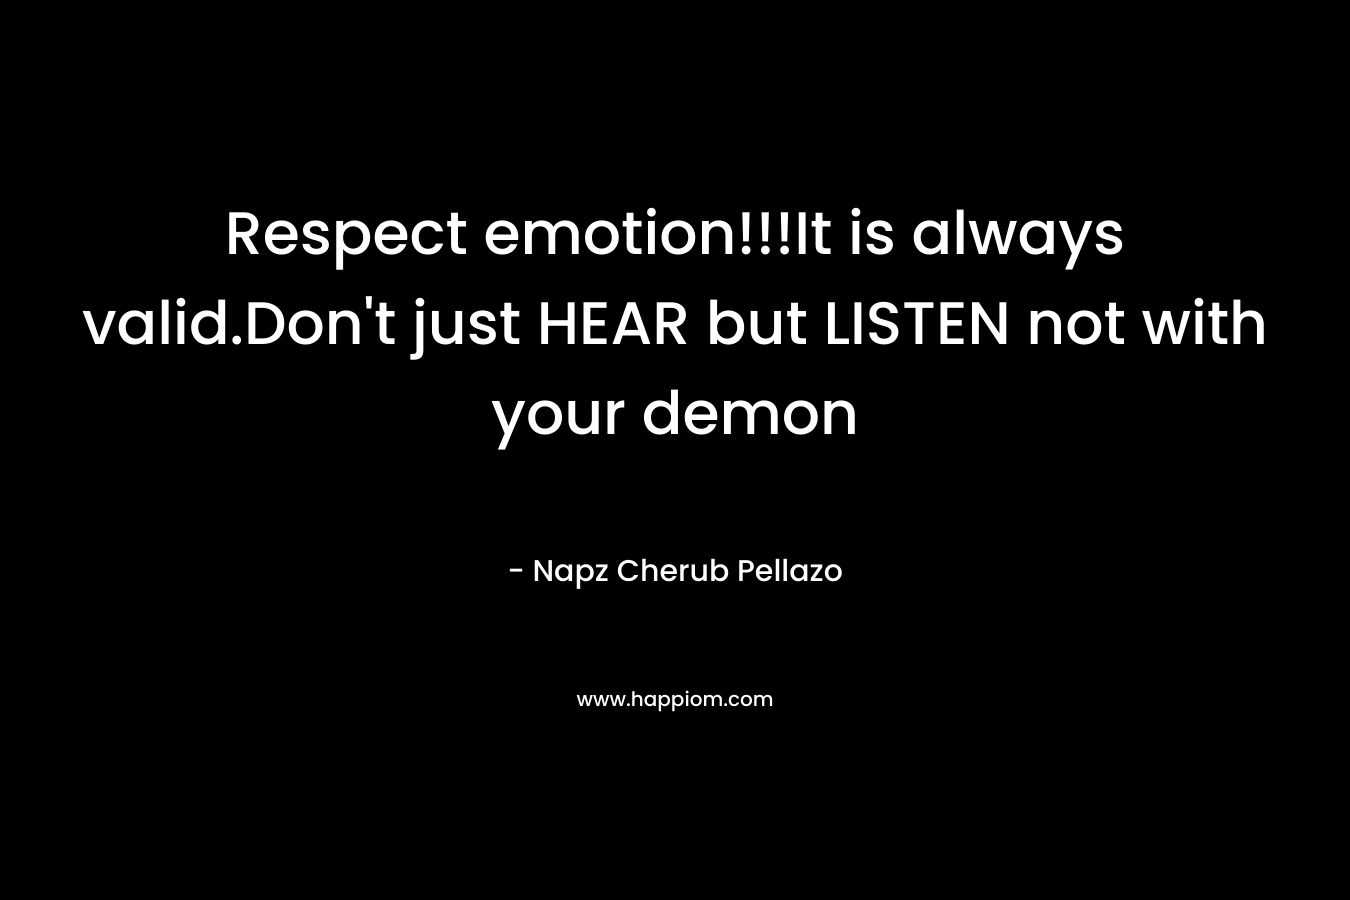 Respect emotion!!!It is always valid.Don't just HEAR but LISTEN not with your demon